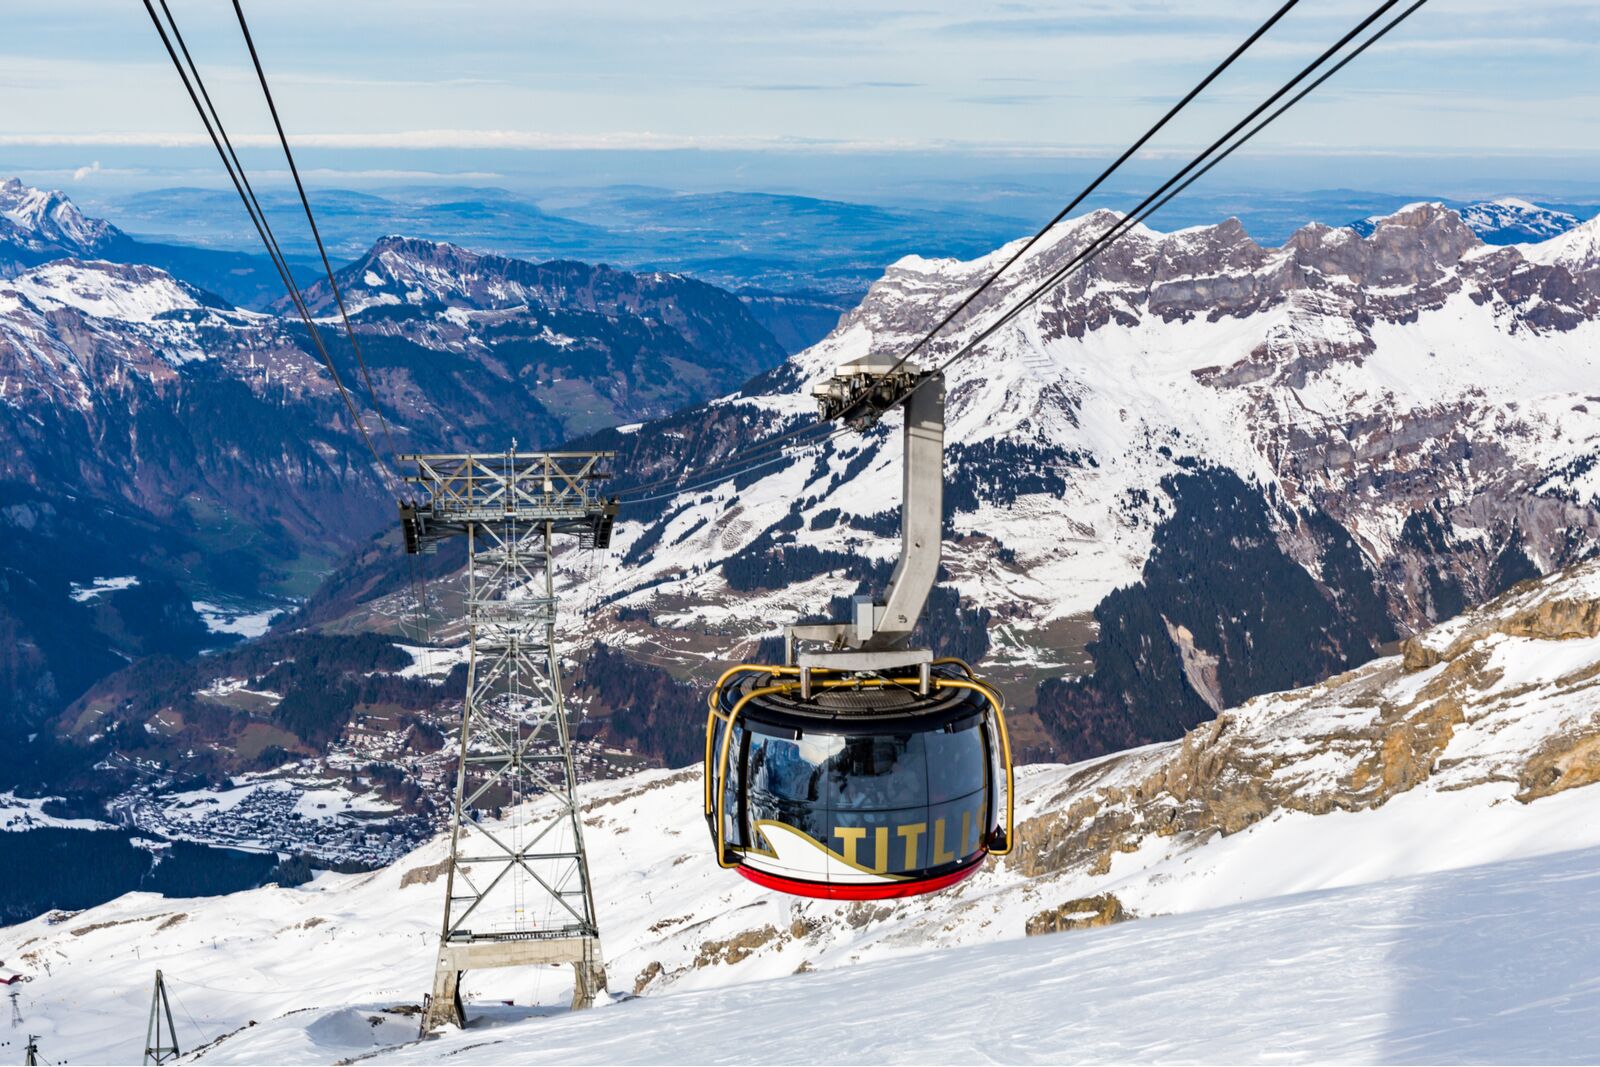 Outside views of the aerial passenger line of the ski resort Engelberg. The rotating cabin is one of the world's coolest ski gondolas